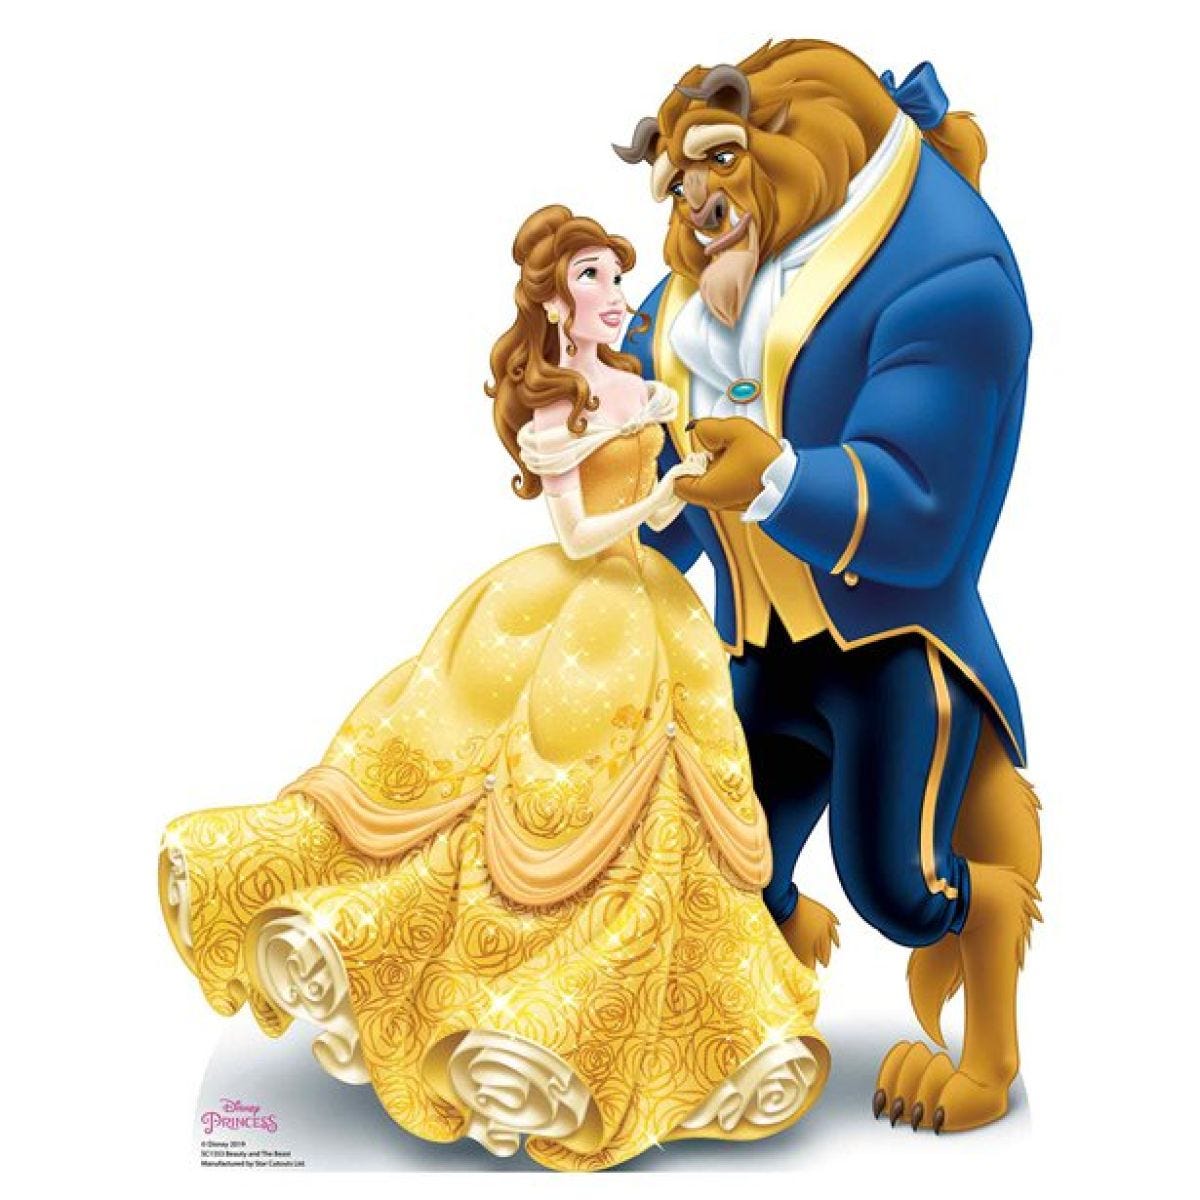 Best of Princess belle pictures